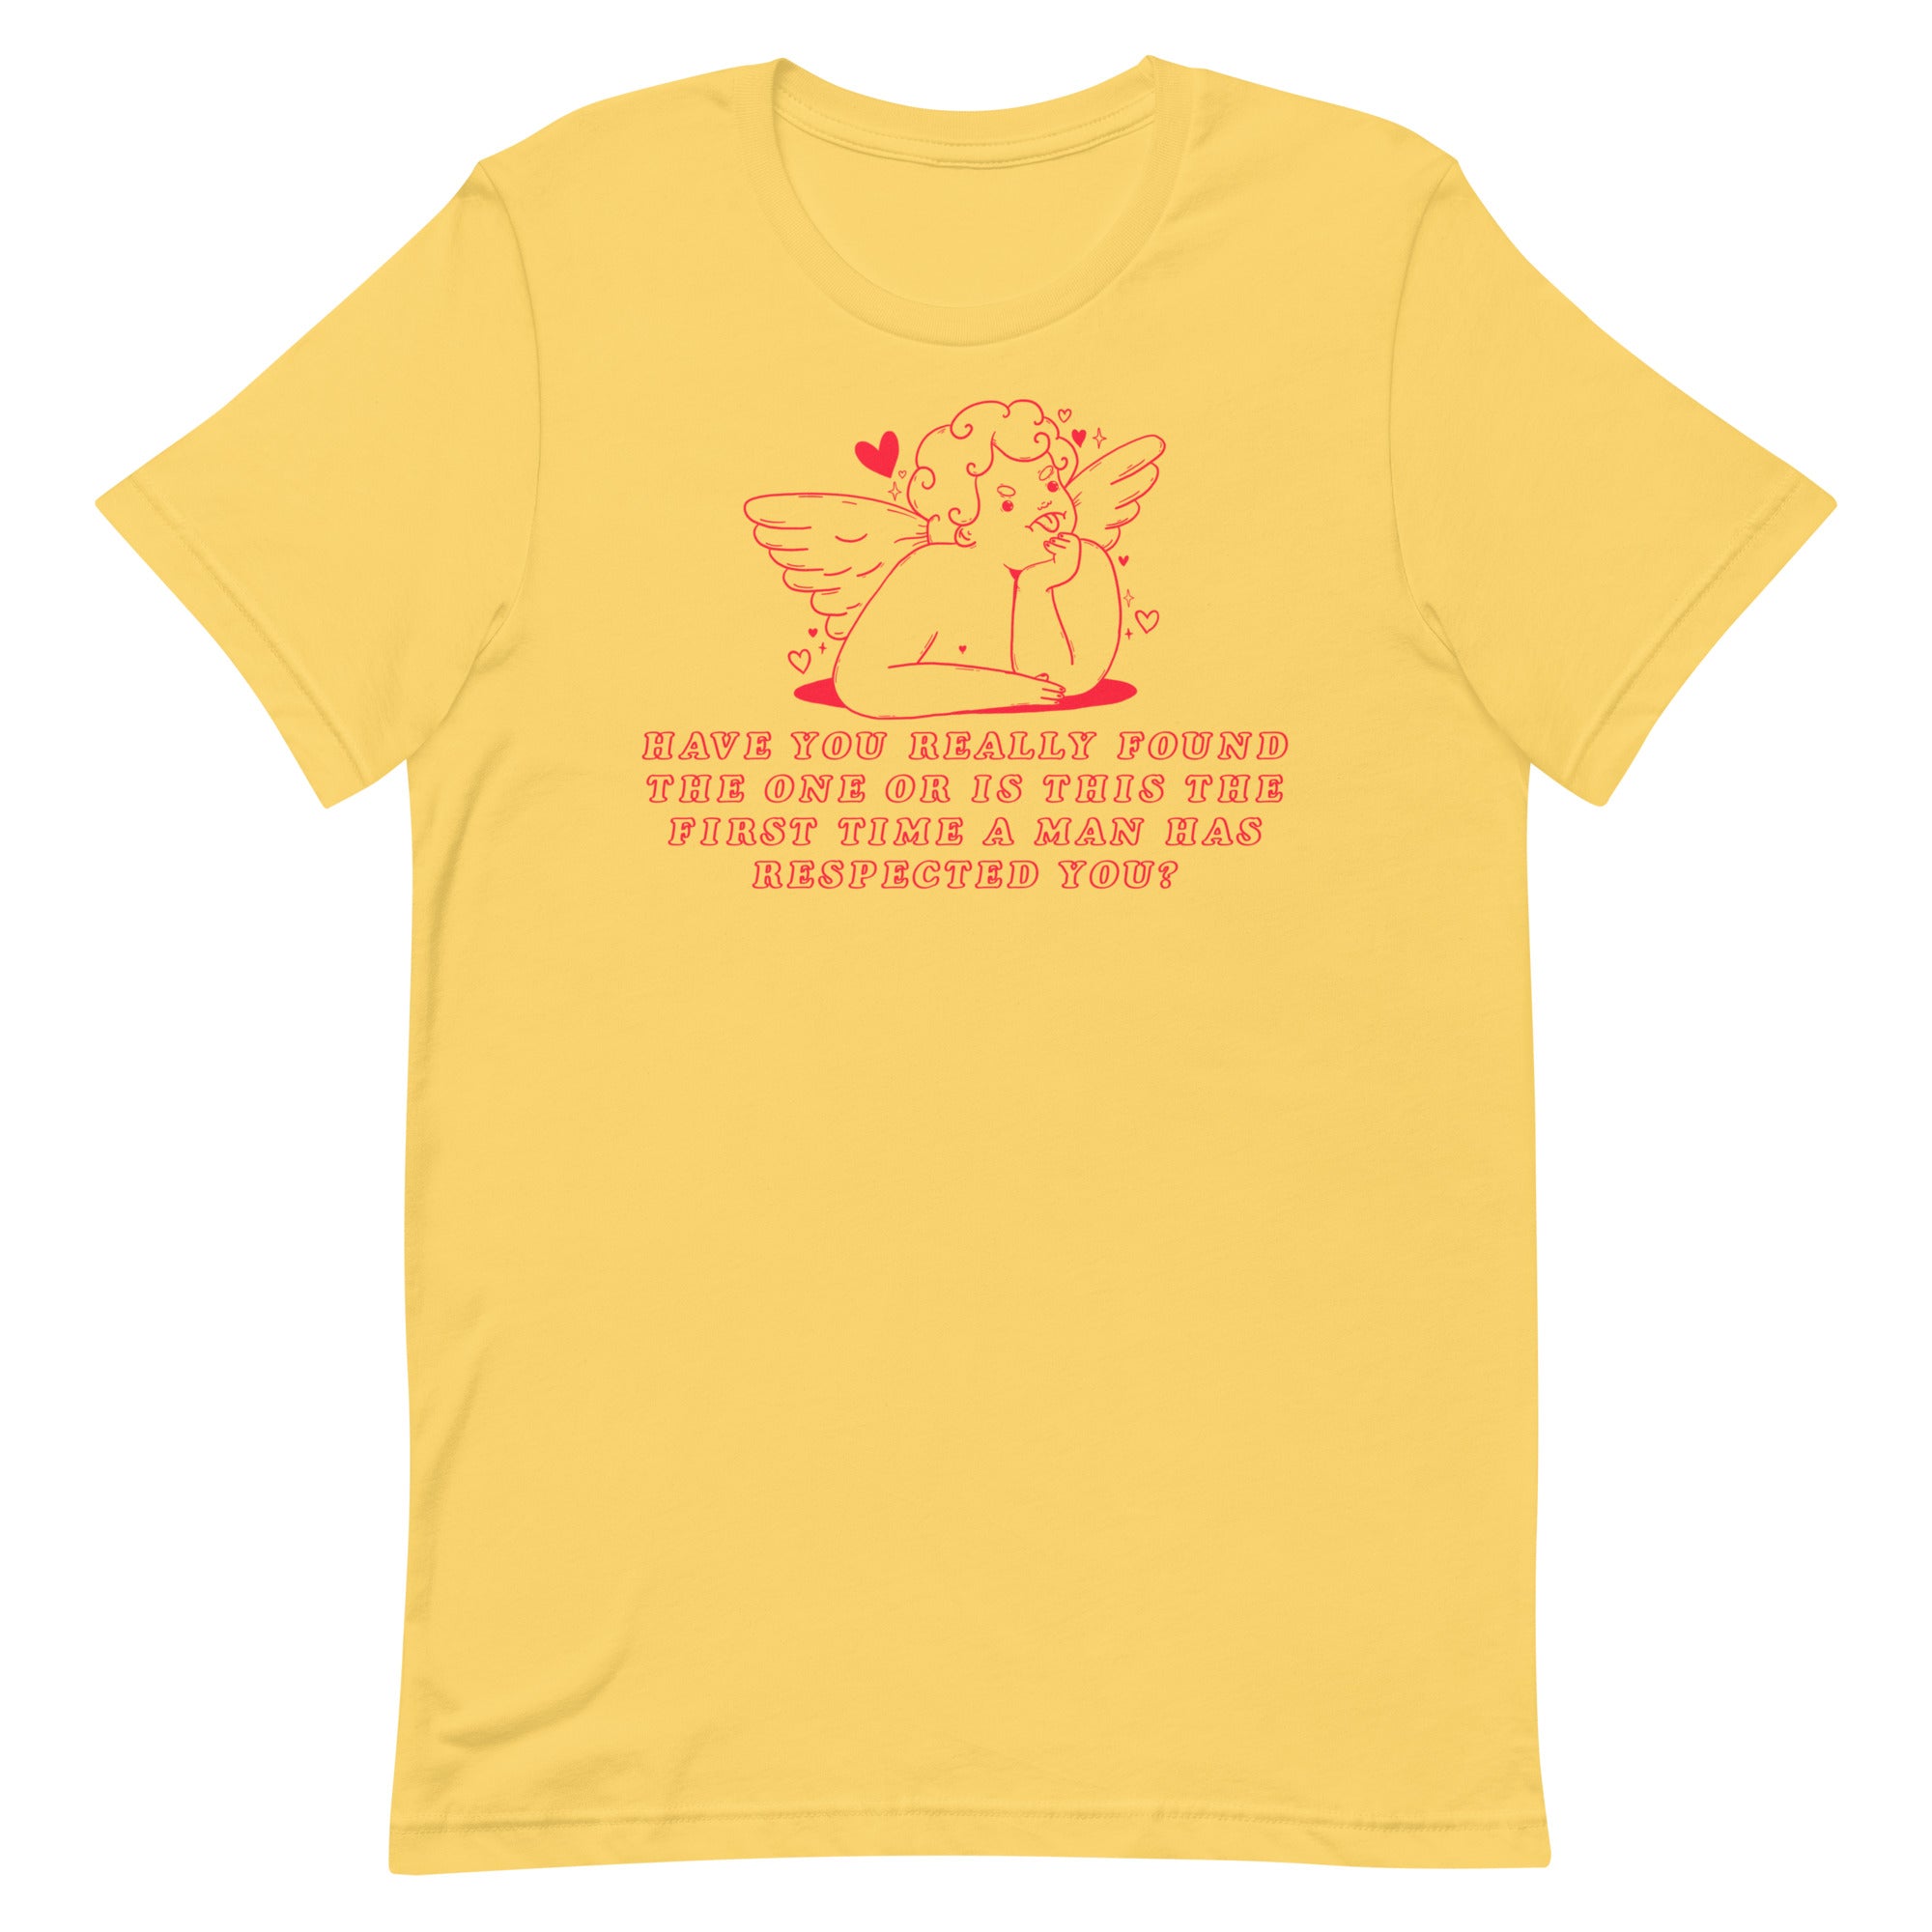 Have You Really Found The One? Unisex Feminist T-shirt - Shop Women’s Rights T-shirts - Feminist Trash Store - Yellow